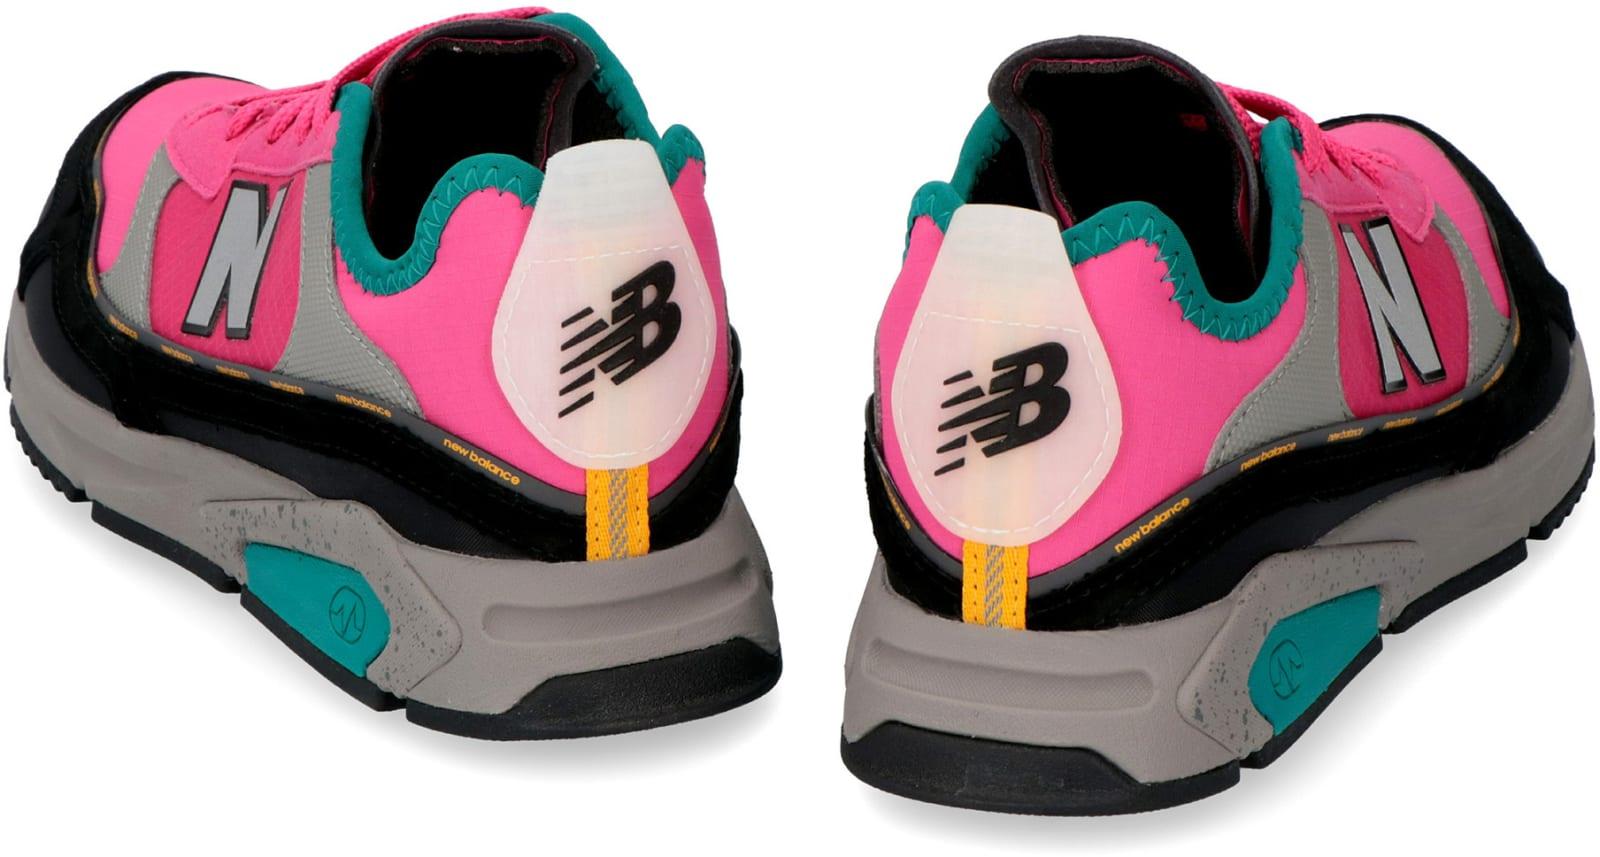 New Balance X-racer Low-top Sneakers in Fuchsia (Pink) - Save 37% | Lyst